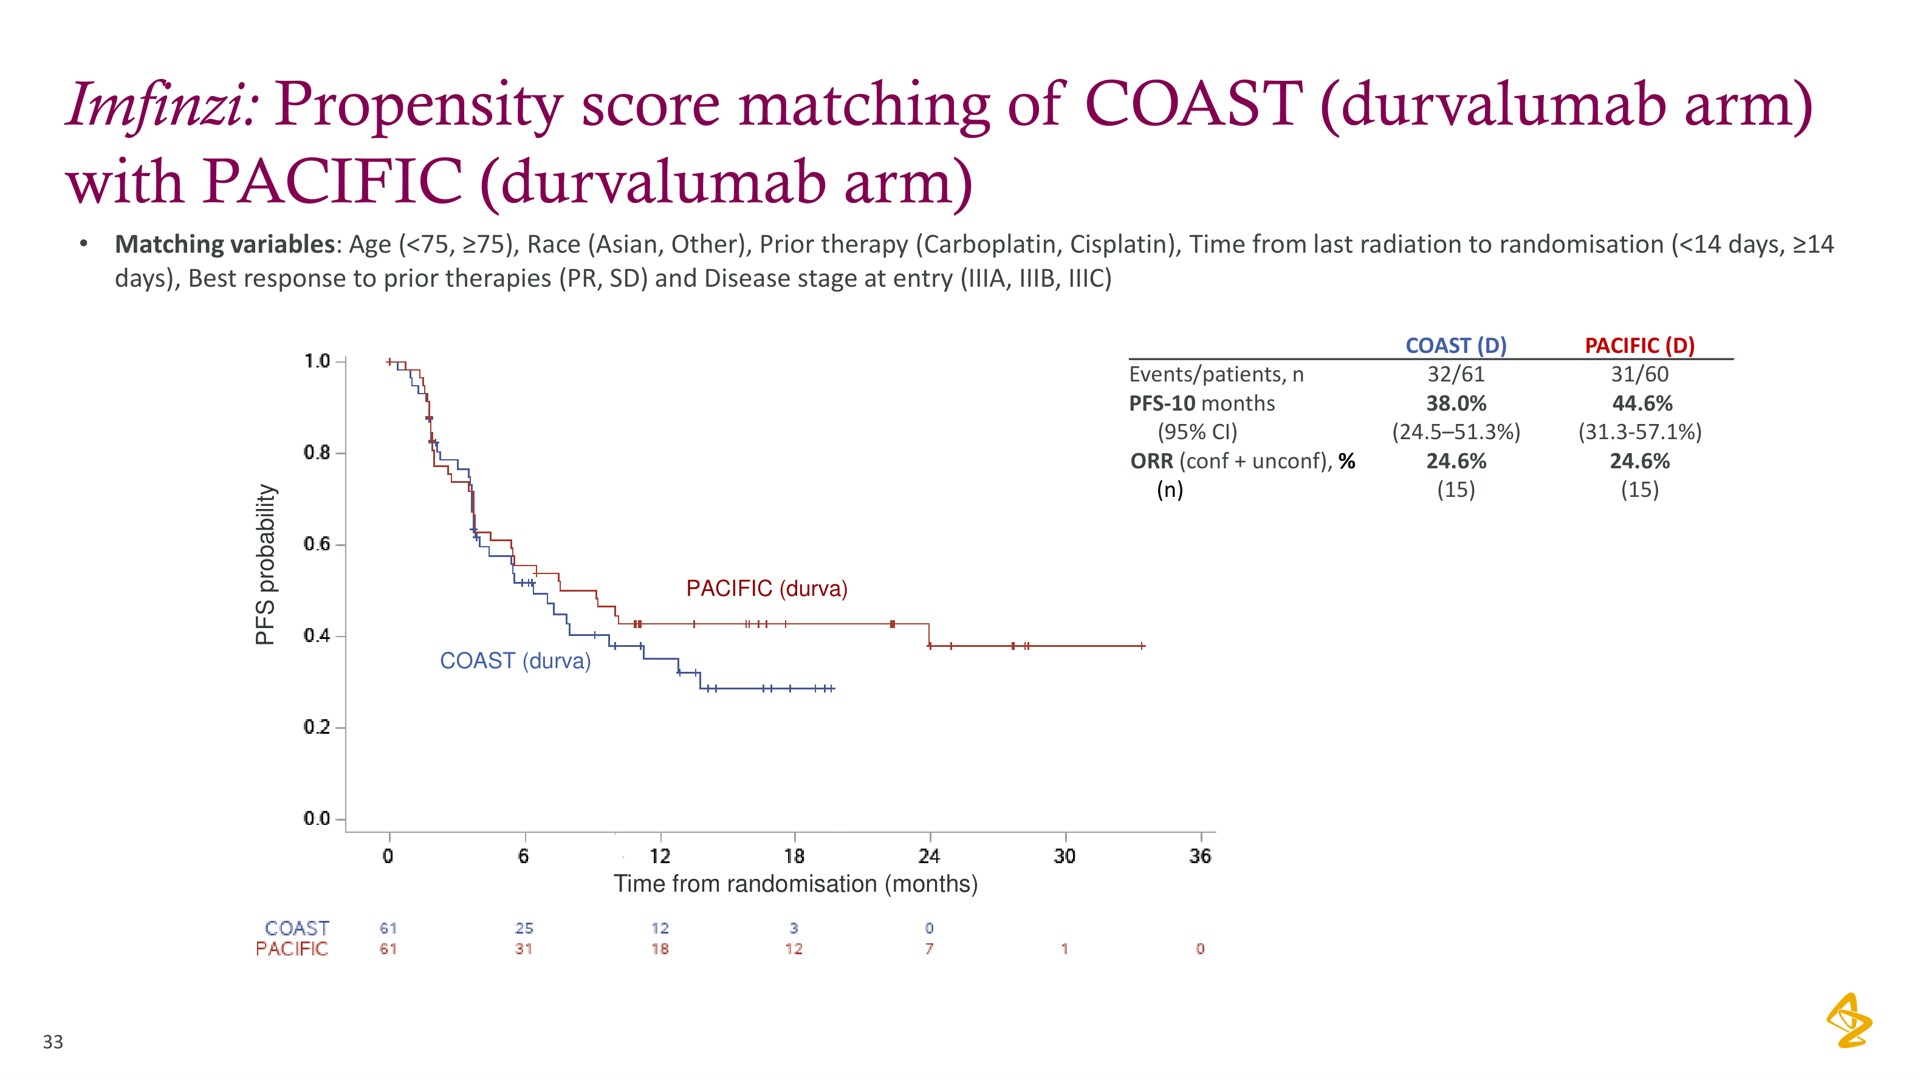 propensity score matching of coast arm with pacific arm | AstraZeneca